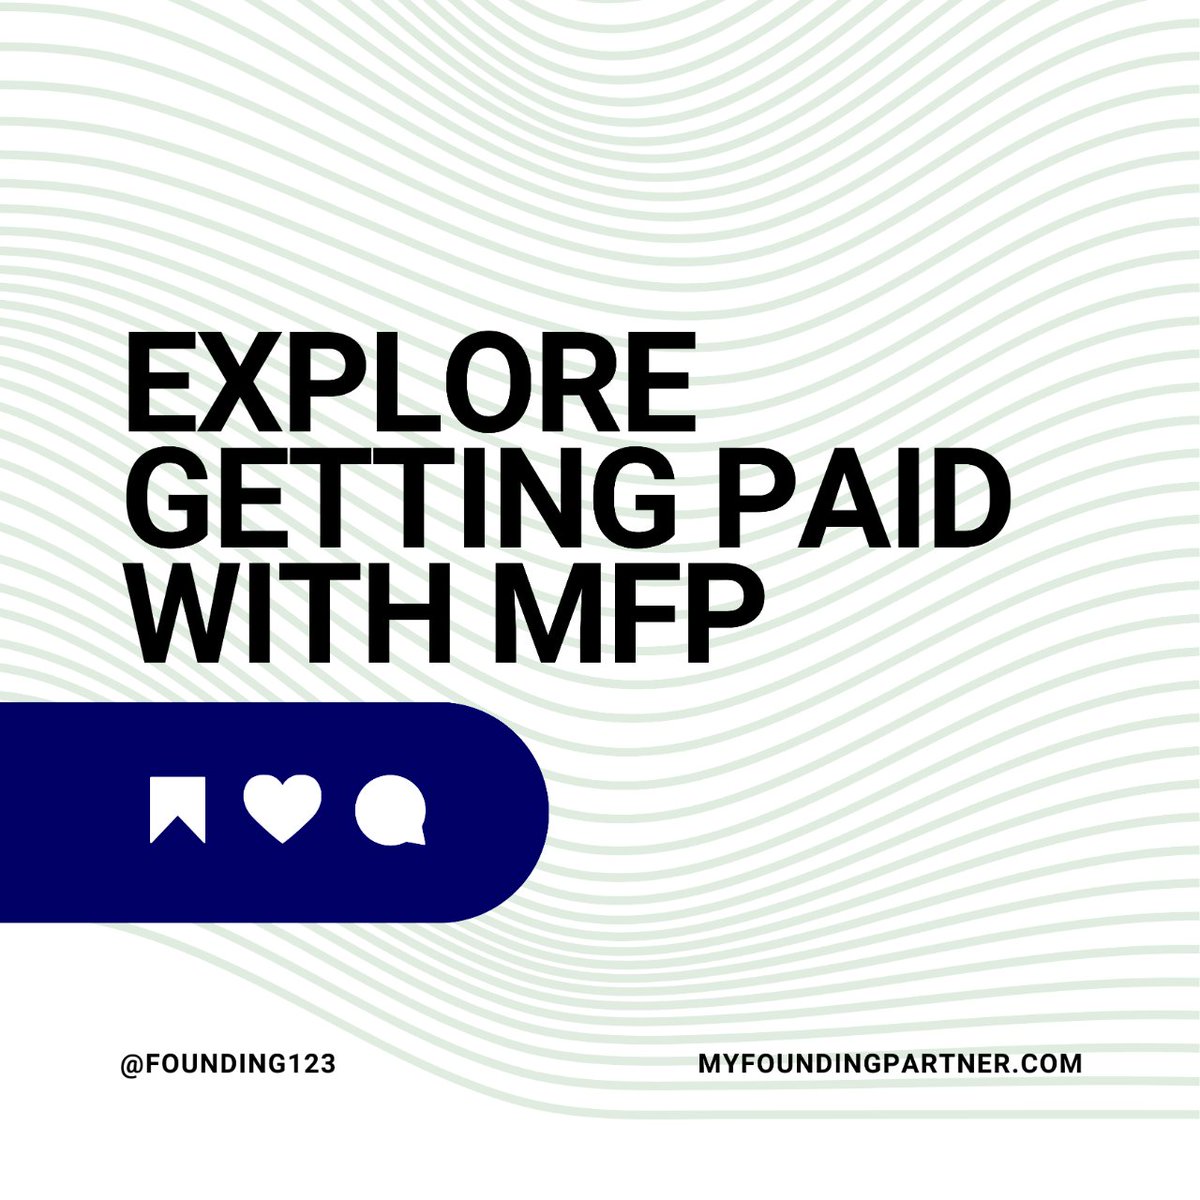 Stripe: The ultimate payment gateway for all businesses? Empower your transactions with MFP. 💳

#FintechInnovation #OnlinePayments #MFP #BeAFounder #MFPartnerQA